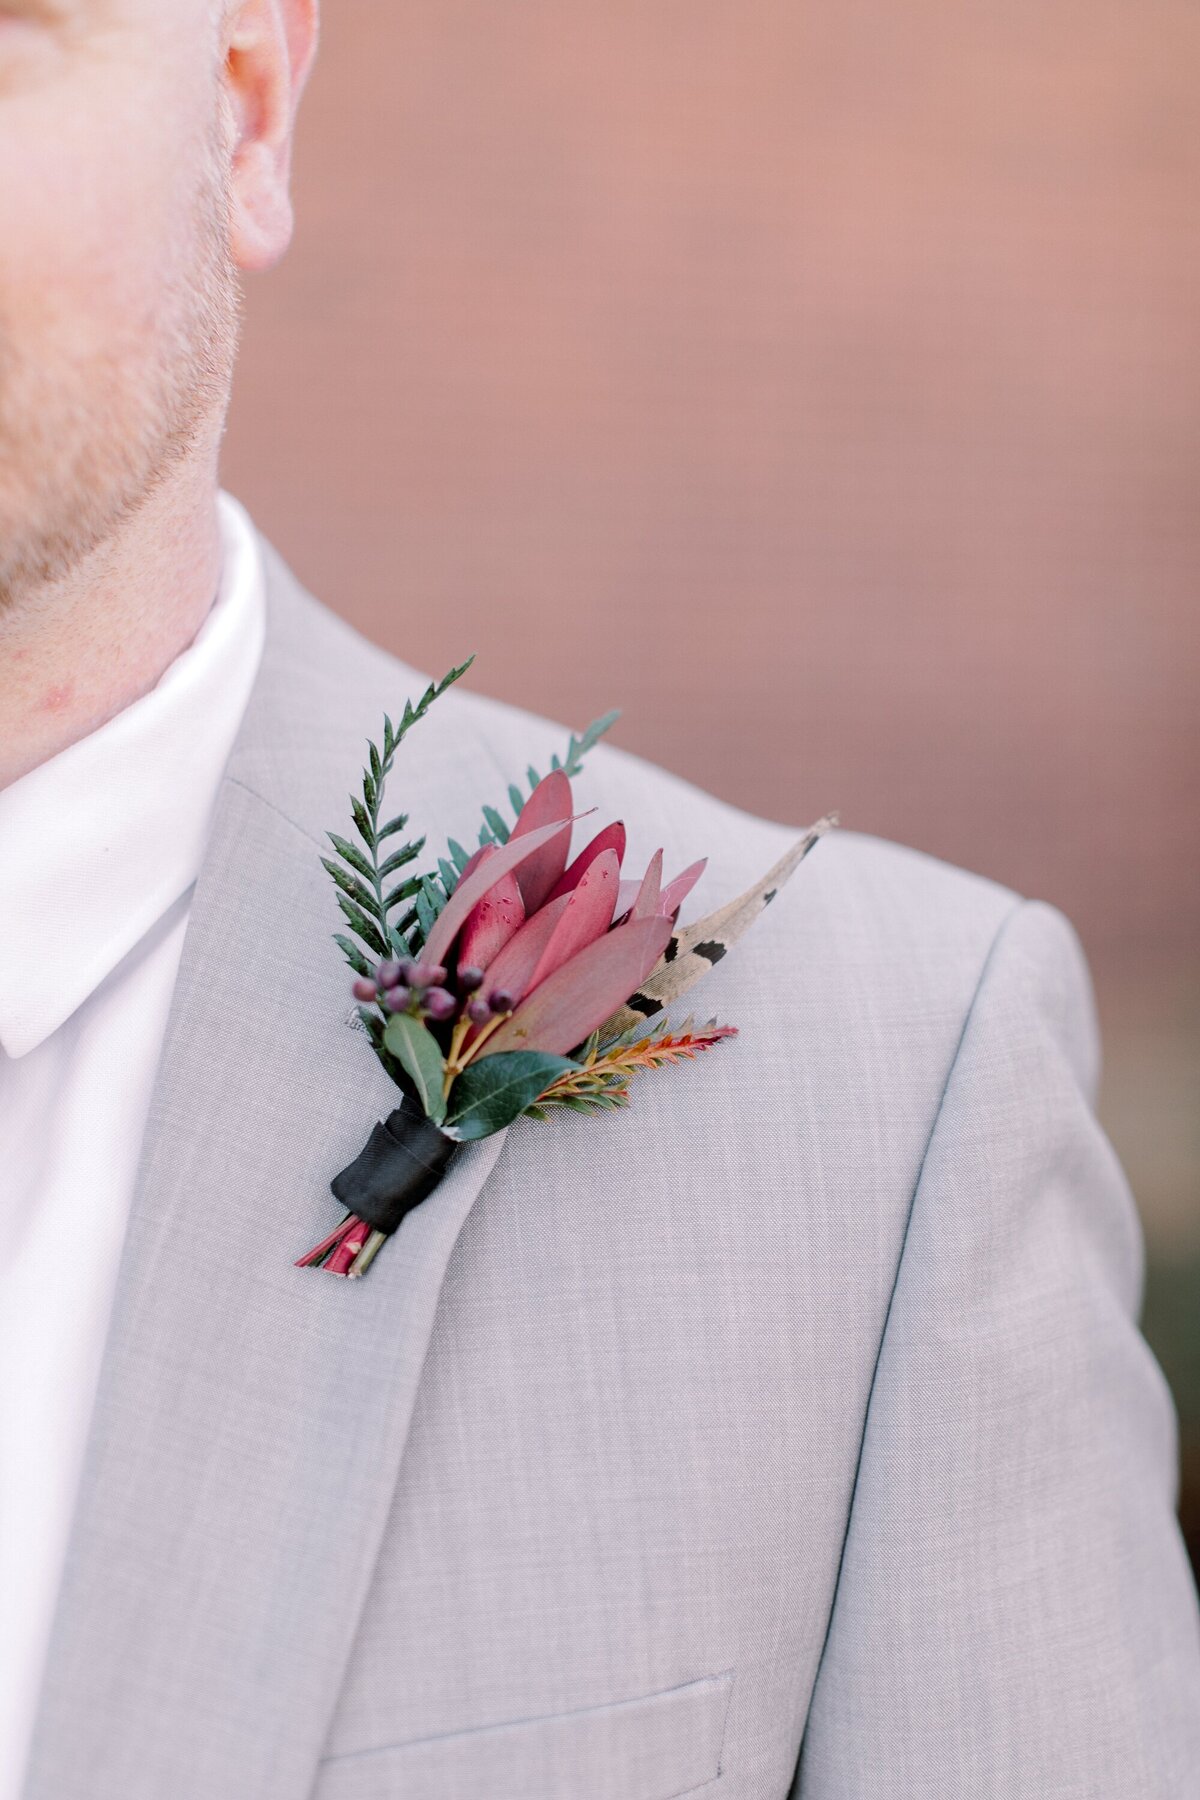 All-The-Dainty-Details-Planning-Charlottesville-Wedding_1140